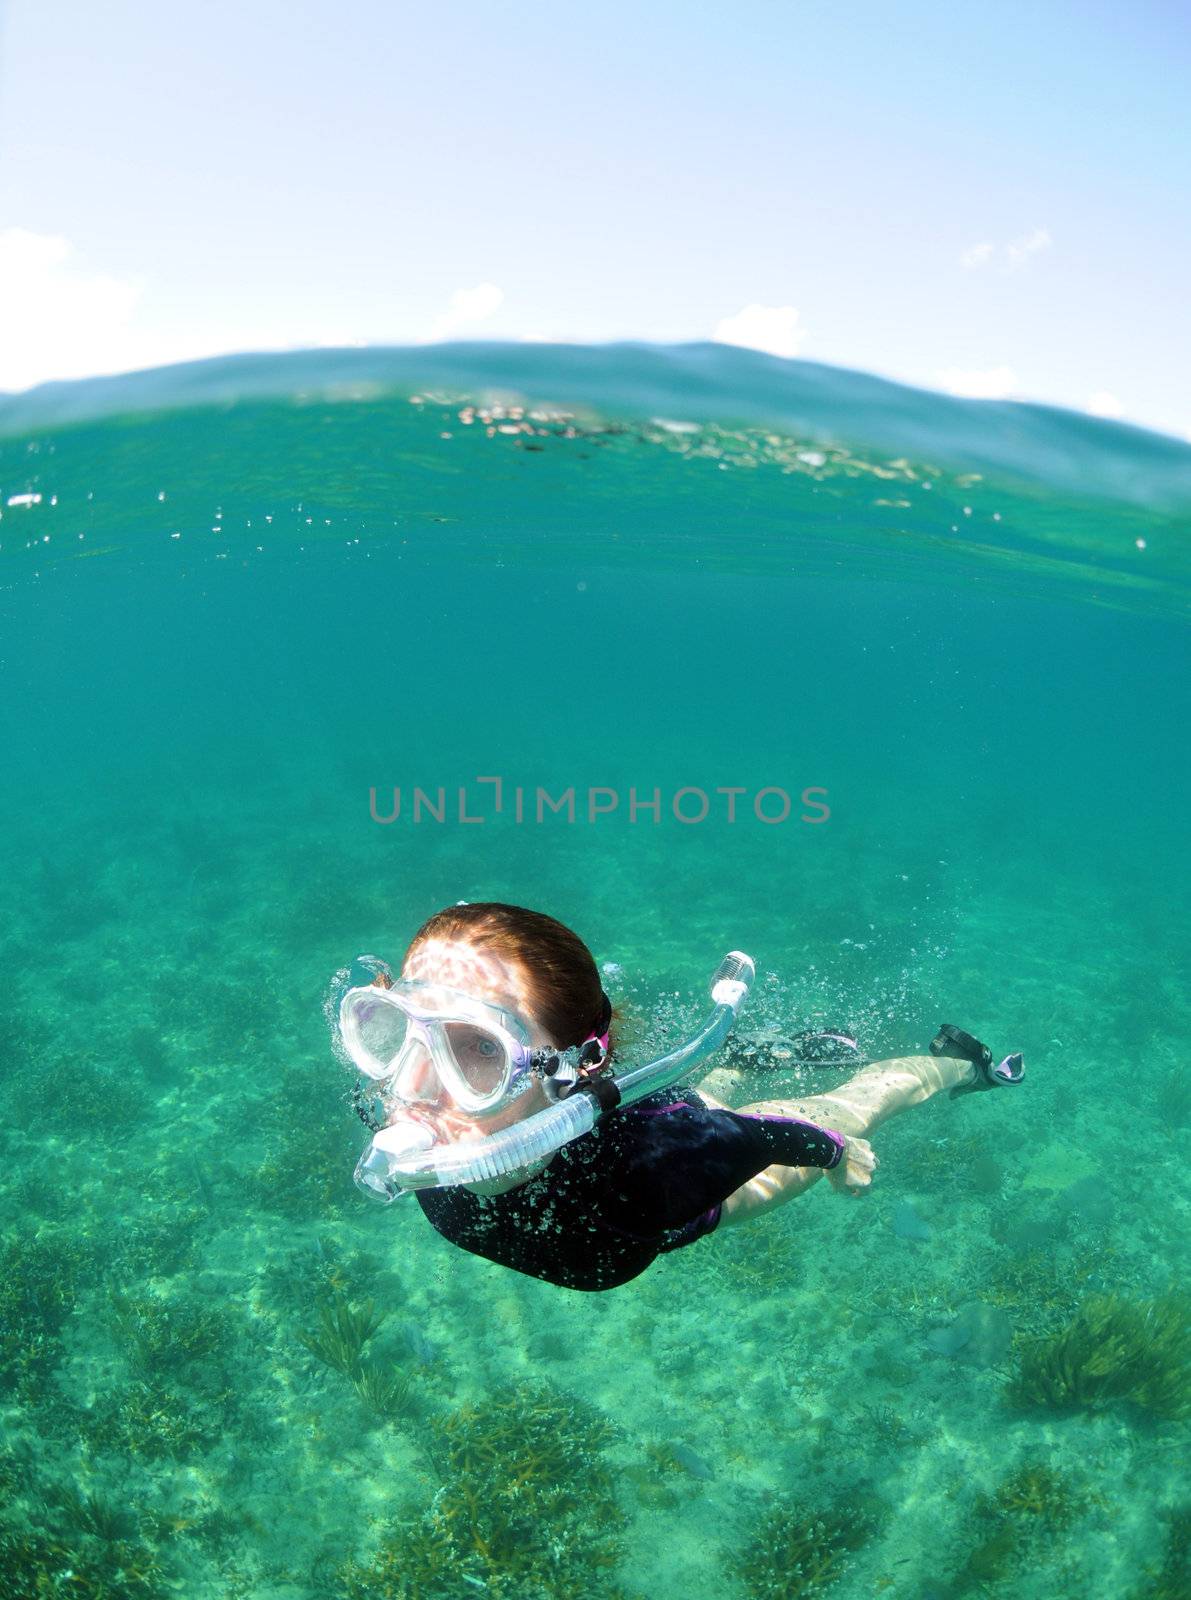 Young woman snorkeling underwater in the clear blue ocean